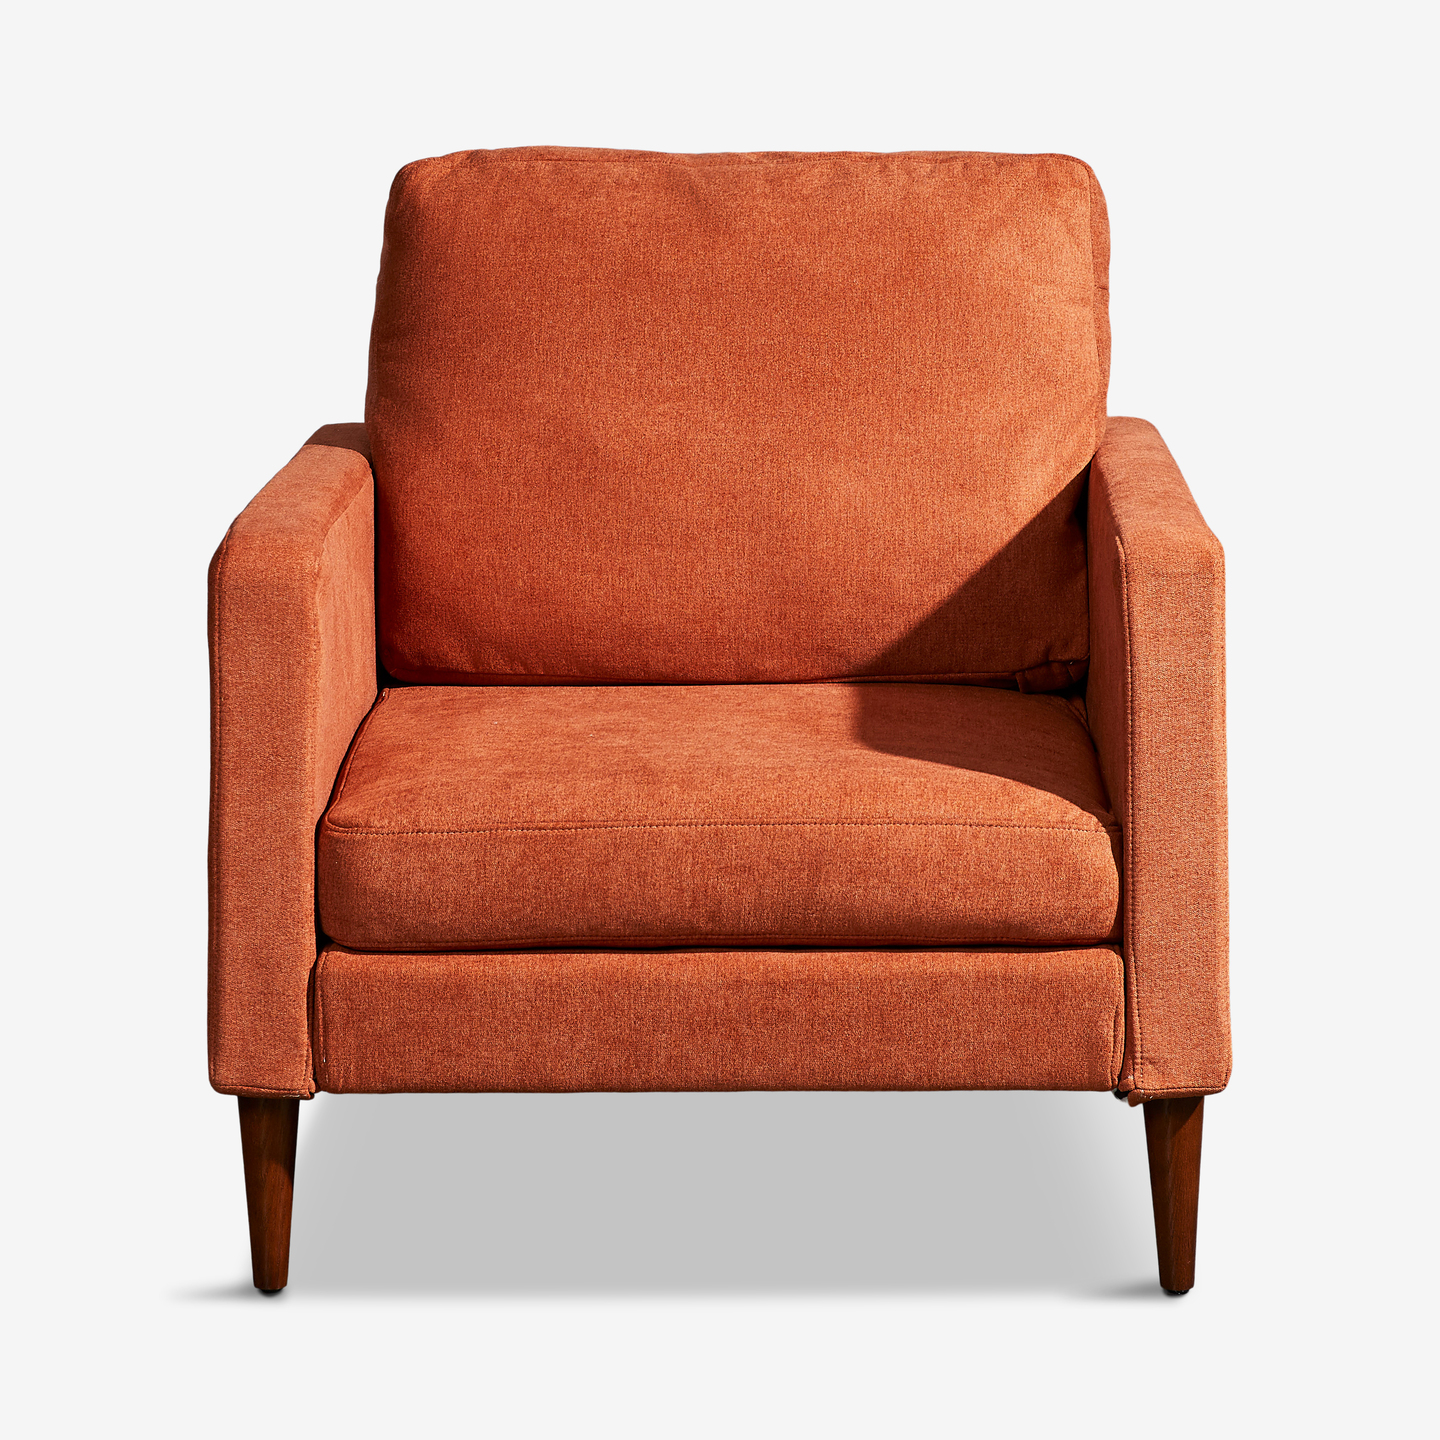 91_Campaign-Chair-Mojave-Orange_Flat-Front 2020